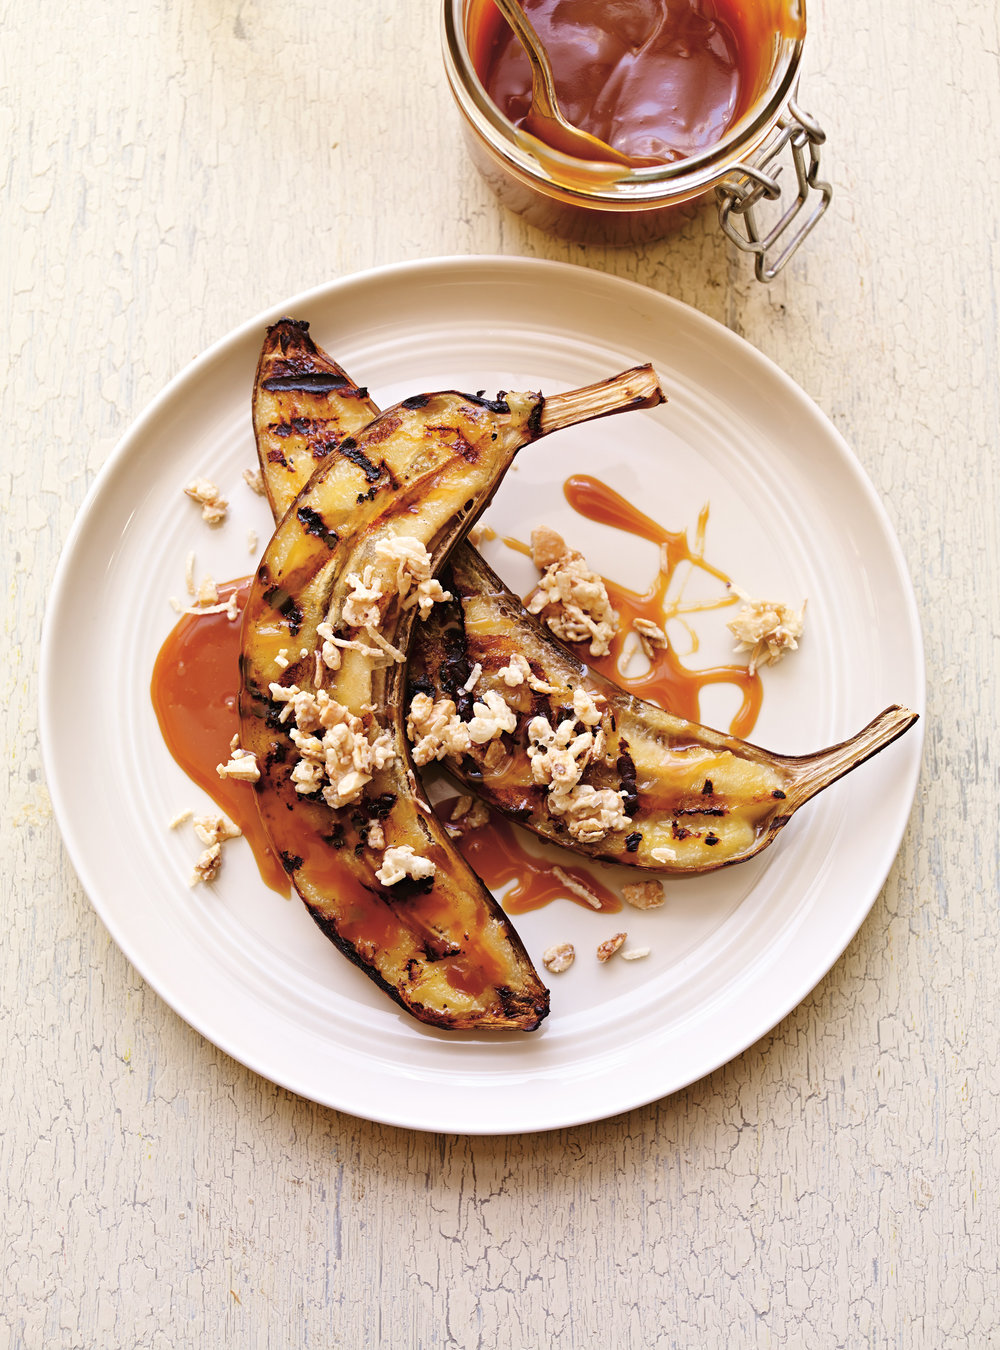 Grilled Banana with Coconut Crumble